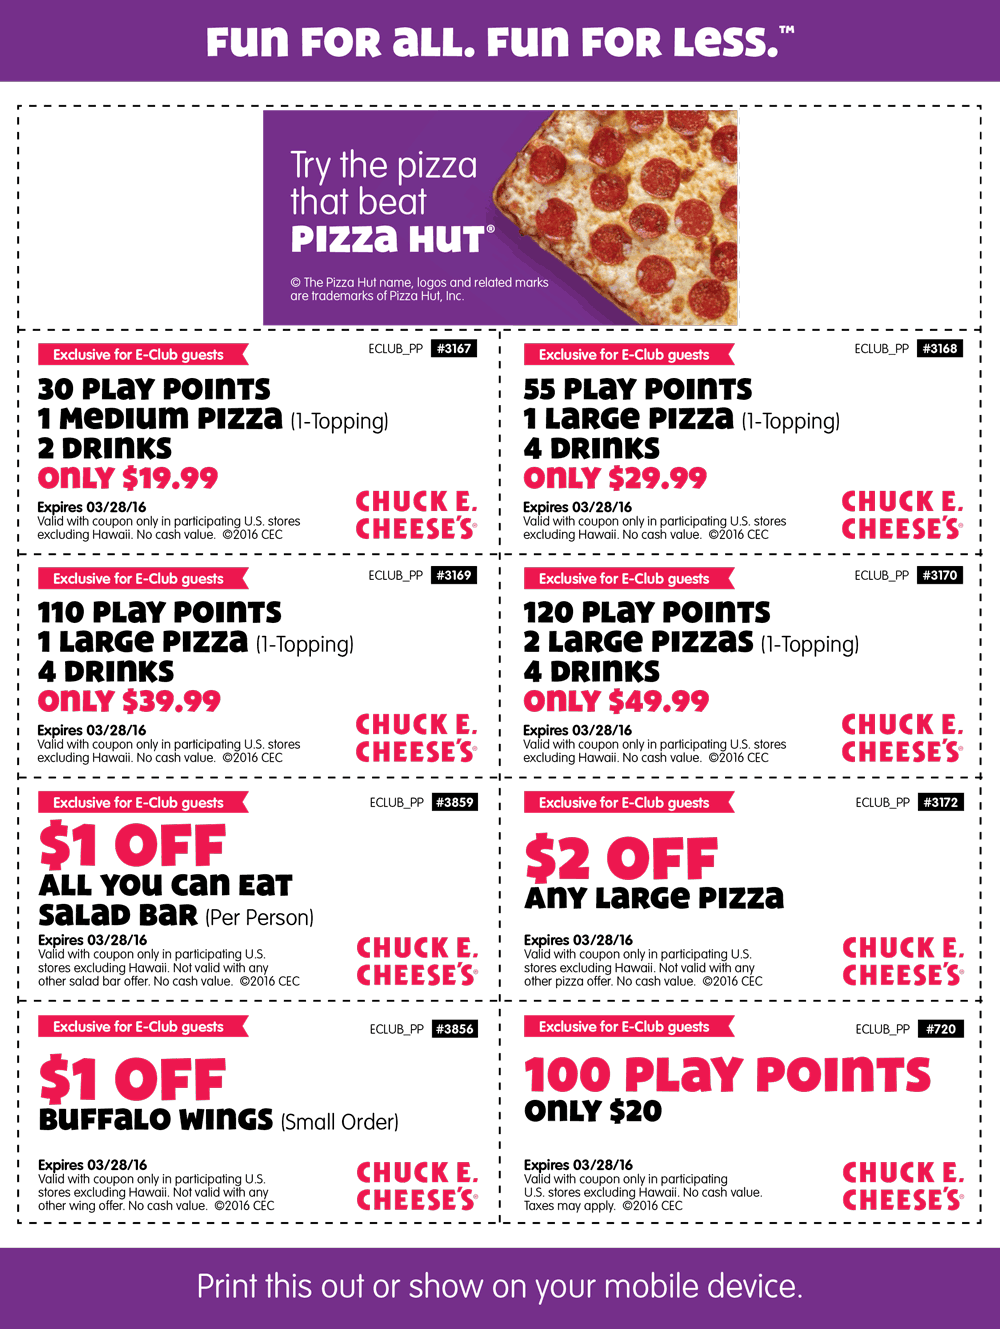 Chuck E. Cheese Coupons - 30 token points + a pizza + 2 drinks = $20 ...